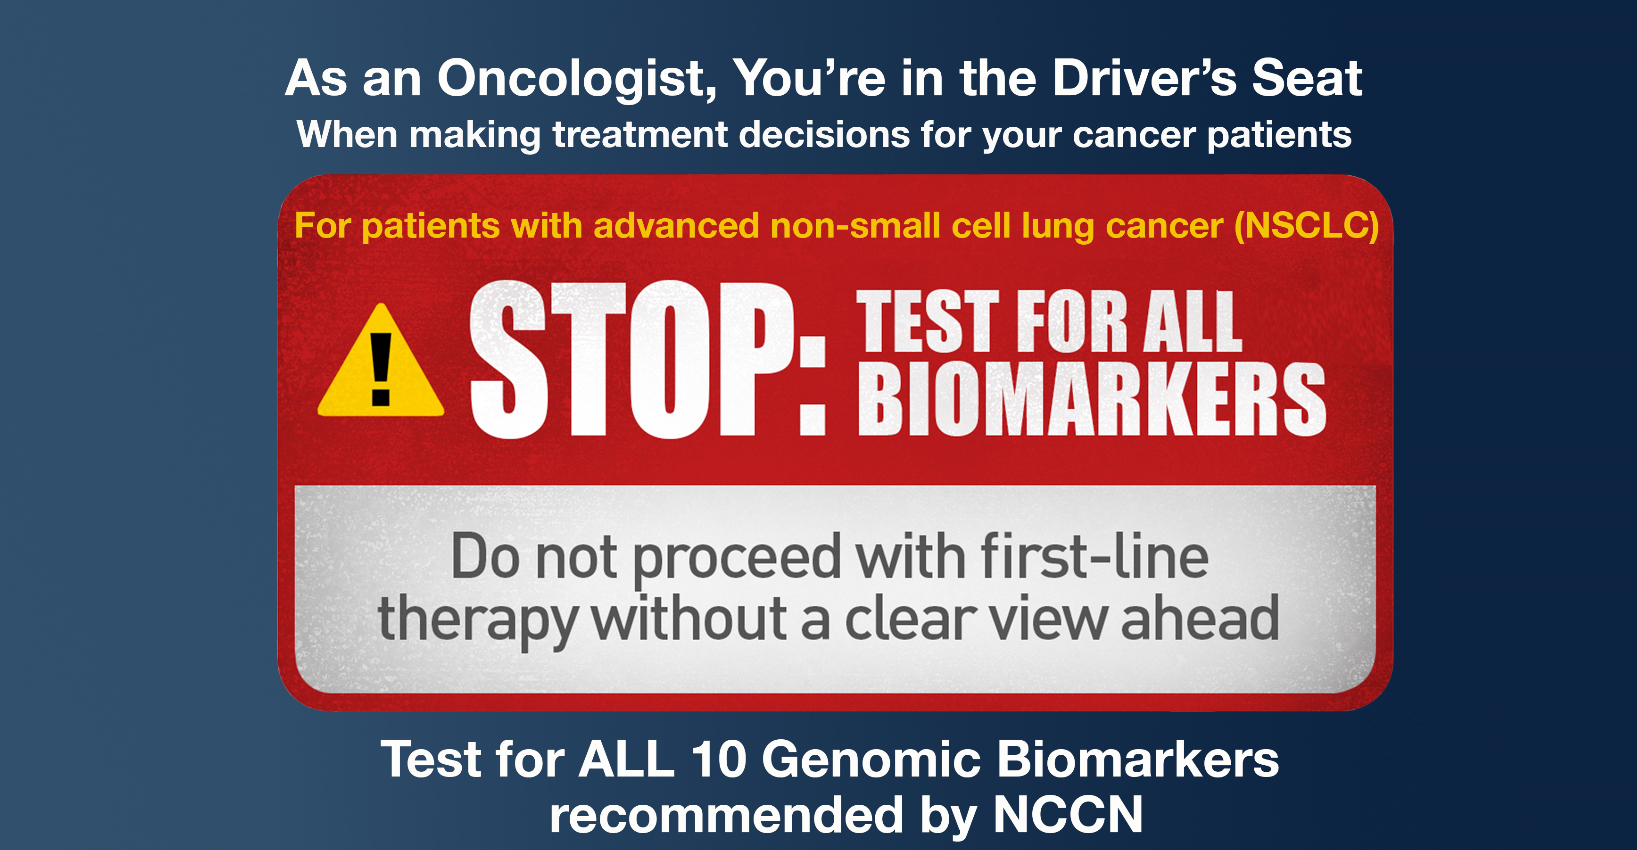 Clear Your View – An Initiative to ensure all NSCLC patients receive complete biomarker testing before first-line treatment